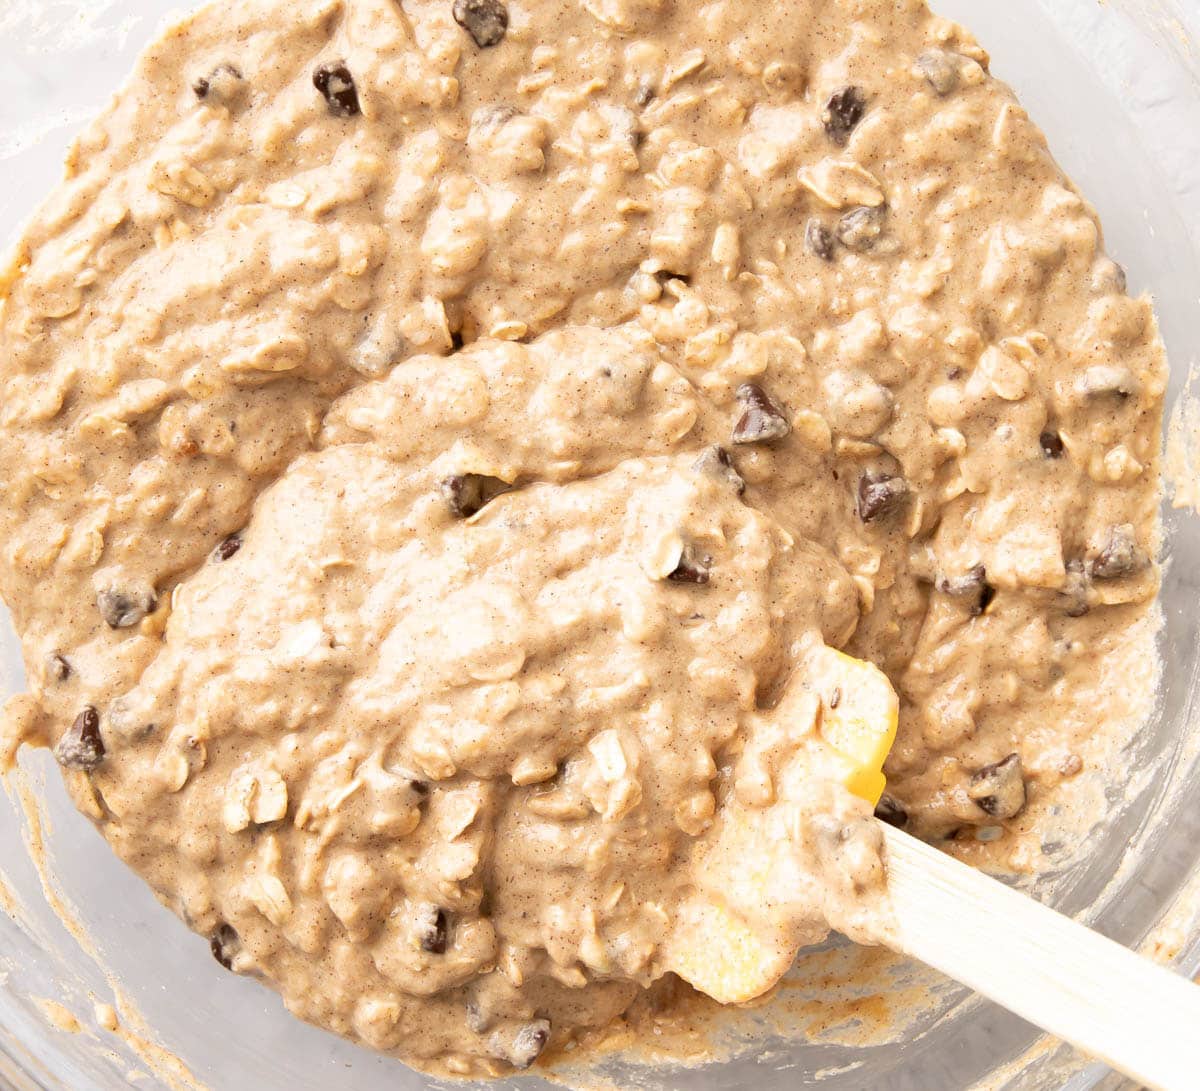 Close up photo of the finished batter before pouring into a loaf pan